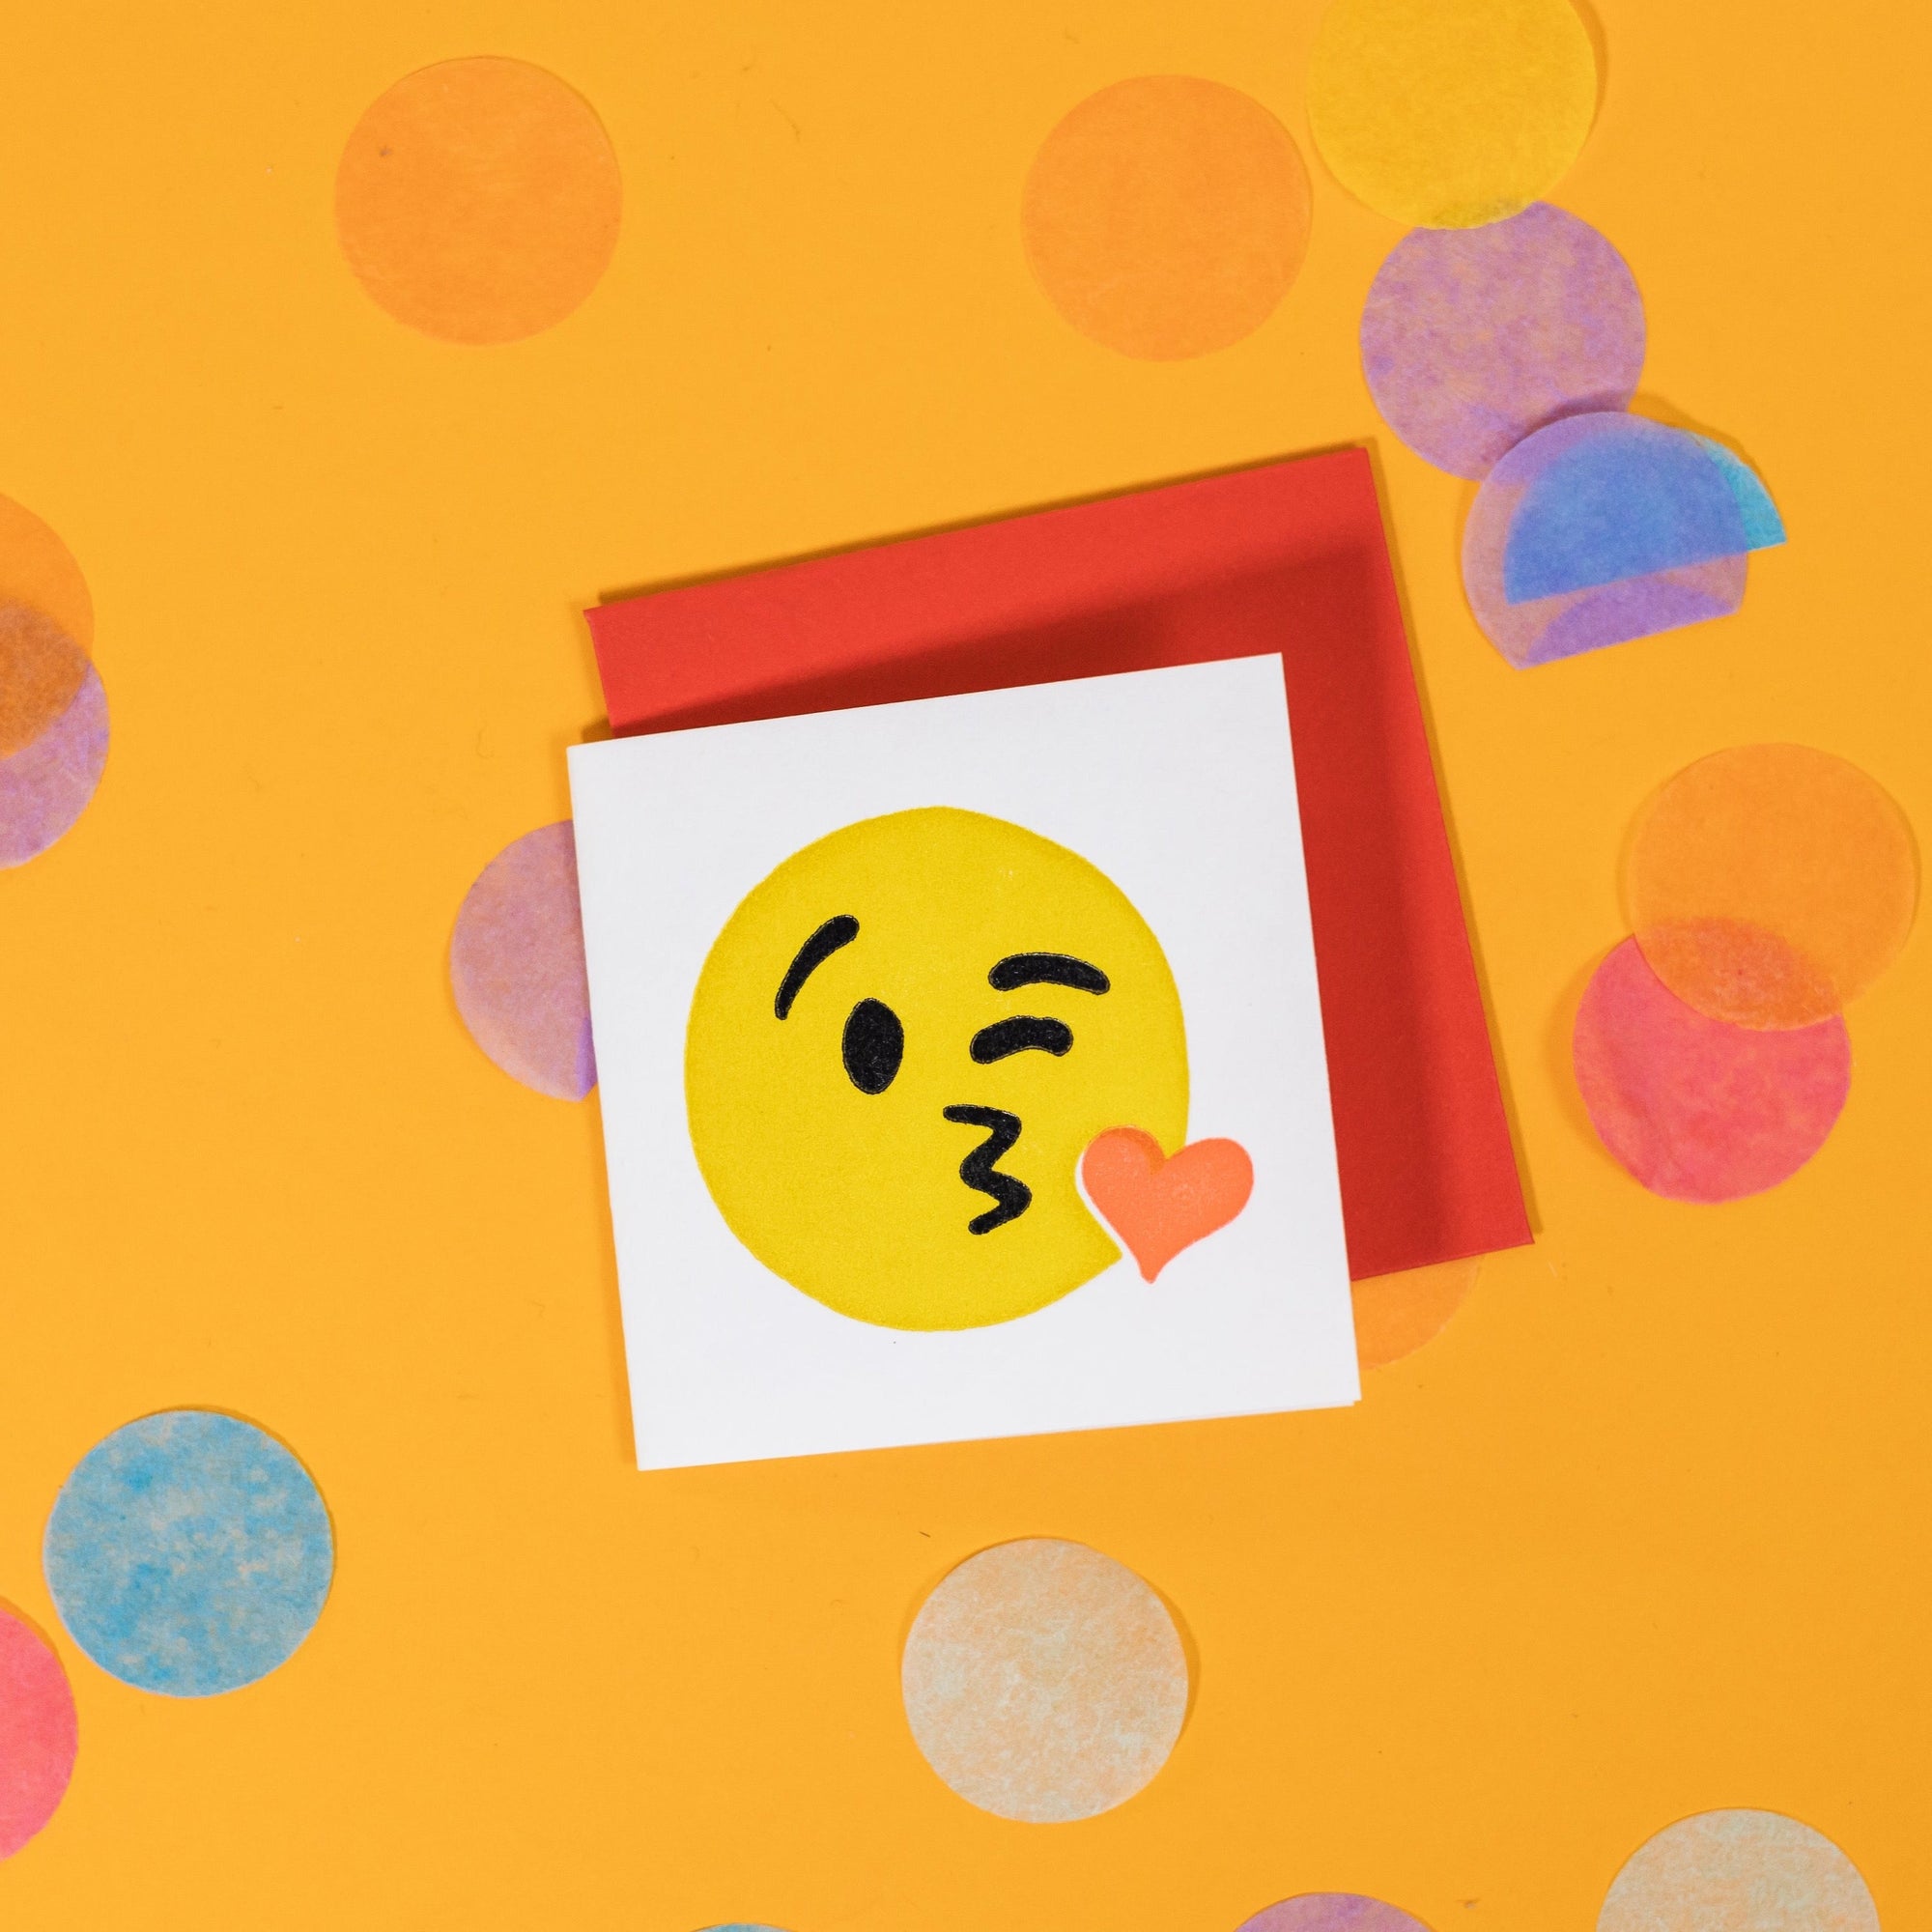 On a sunny mustard background is a mini greeting card and envelope surrounded by big, colorful confetti. The white mini card has a letterpress illustration of a kissy Emoji face winking. It is a yellow face with a red heart kiss. The envelope is a red color. 2.5"x2.5"